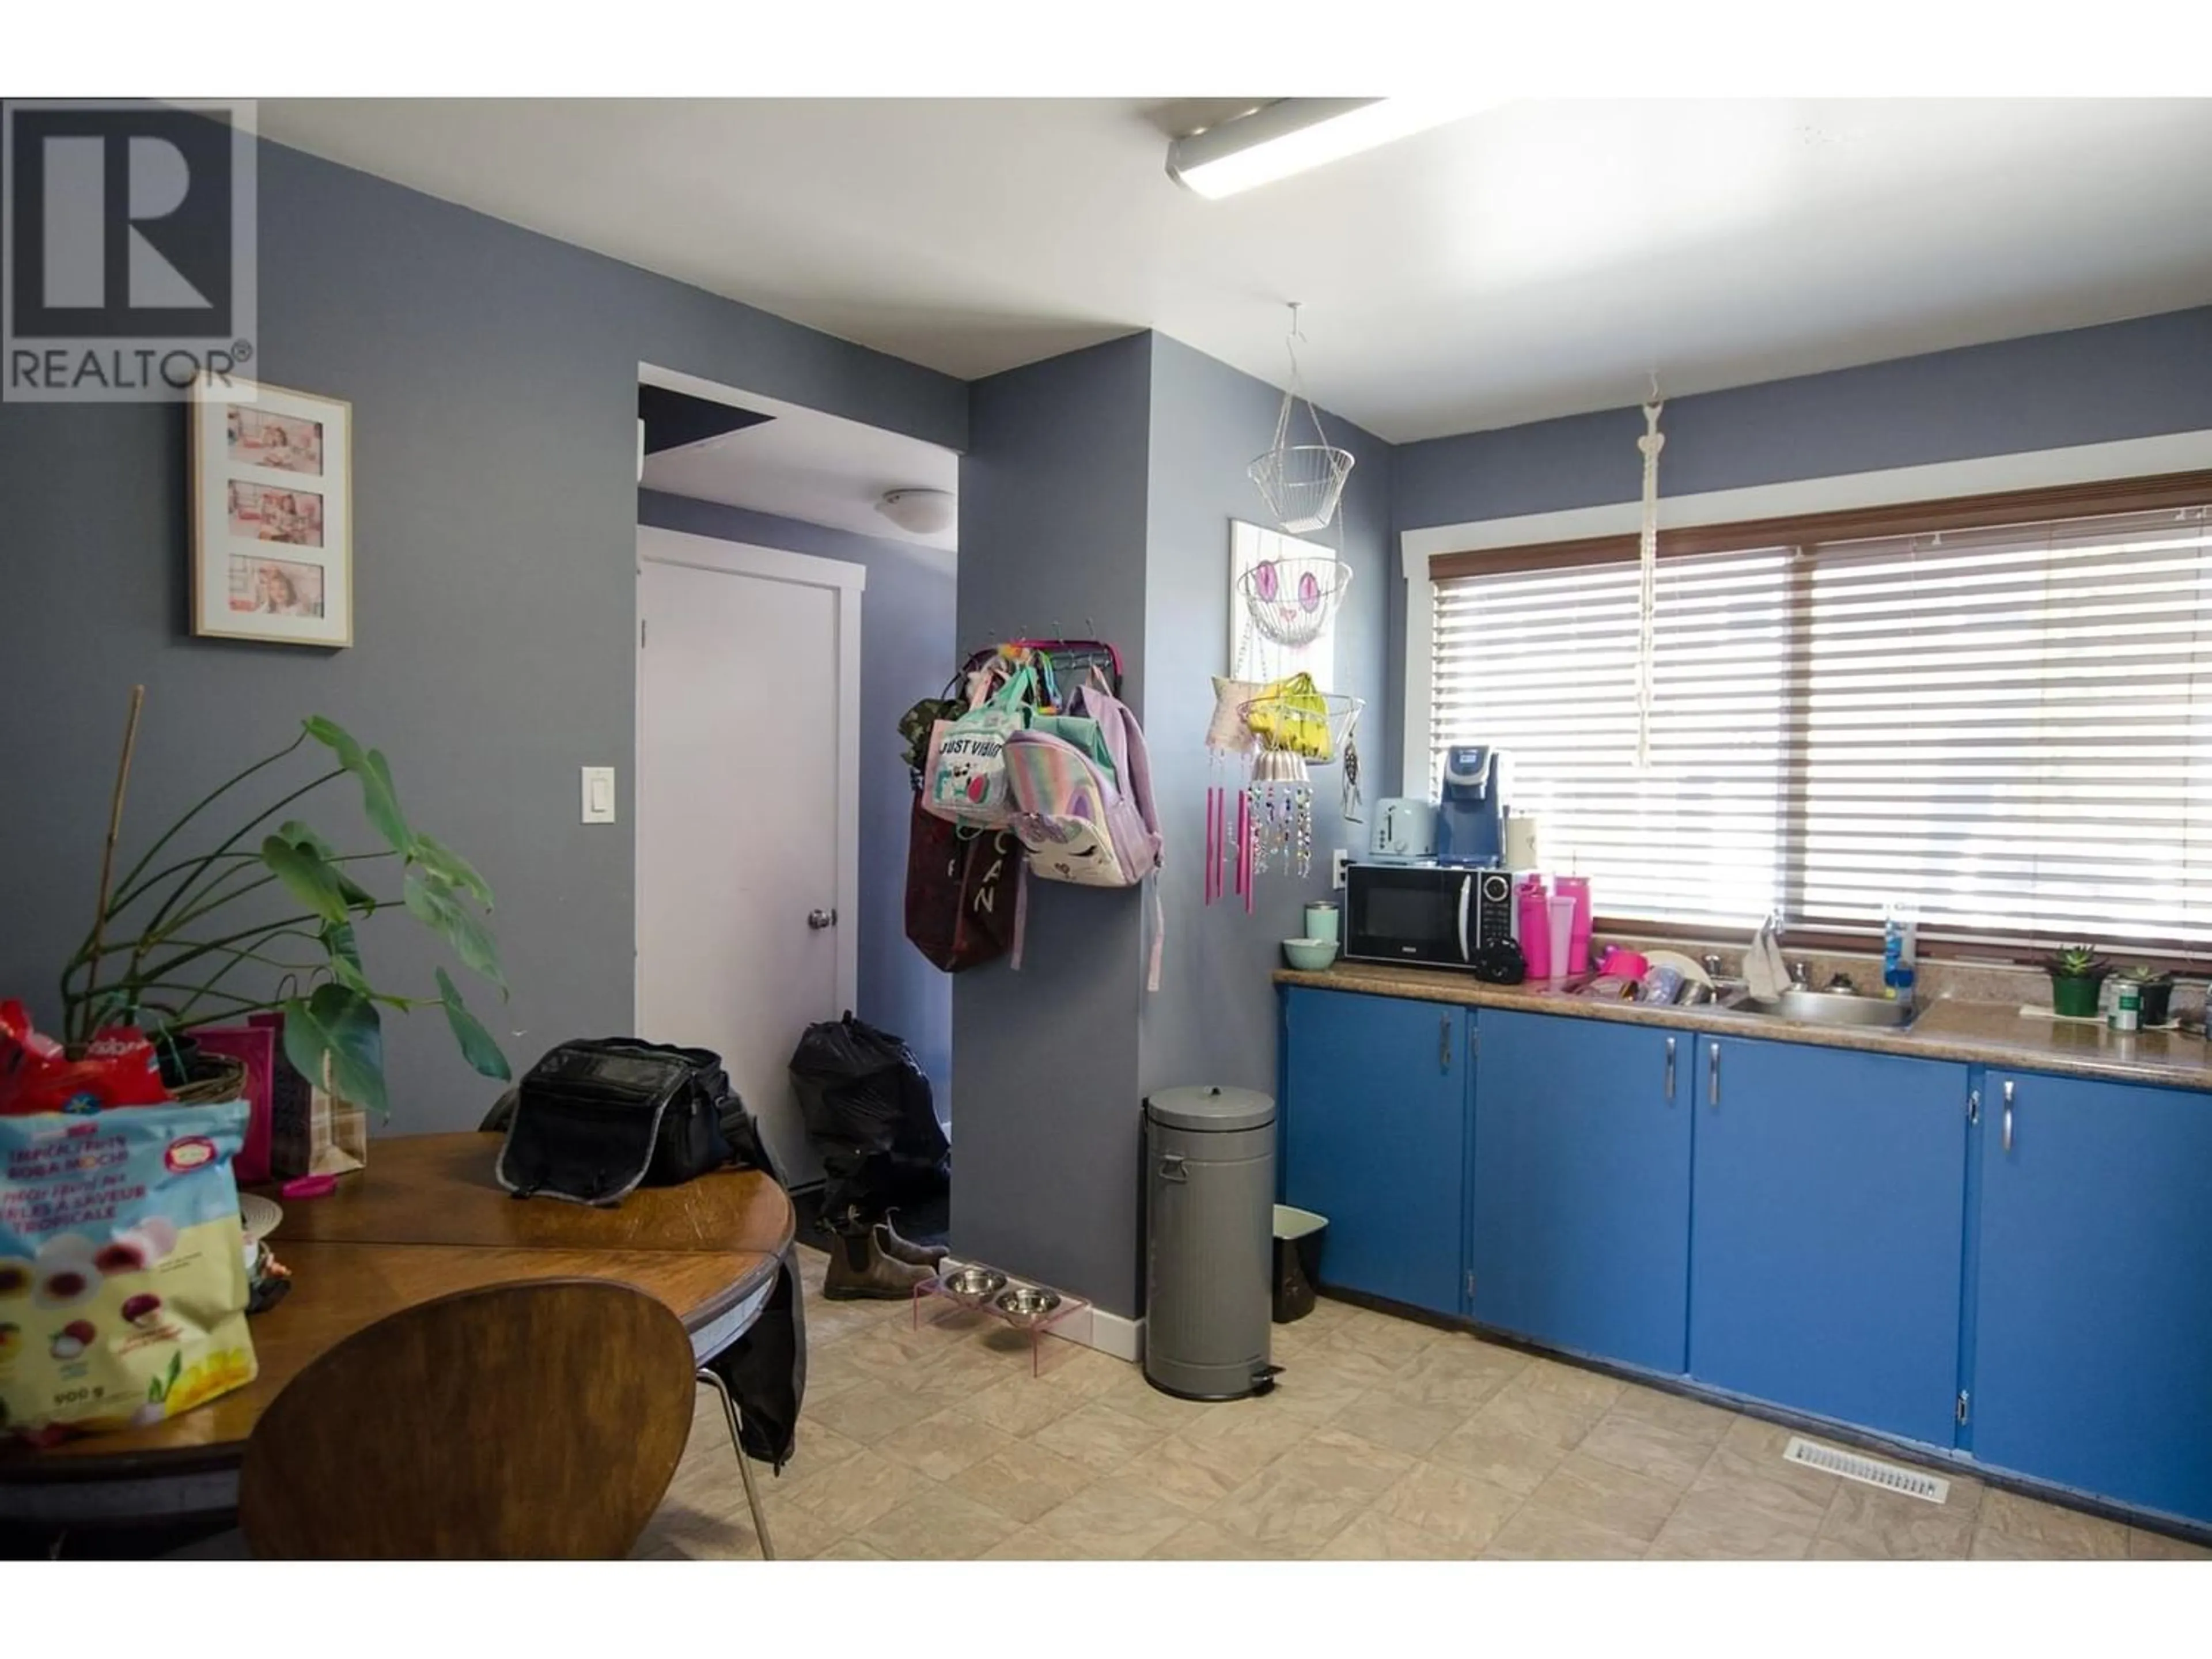 A pic of a room for D75 2131 UPLAND STREET, Prince George British Columbia V2L2V8